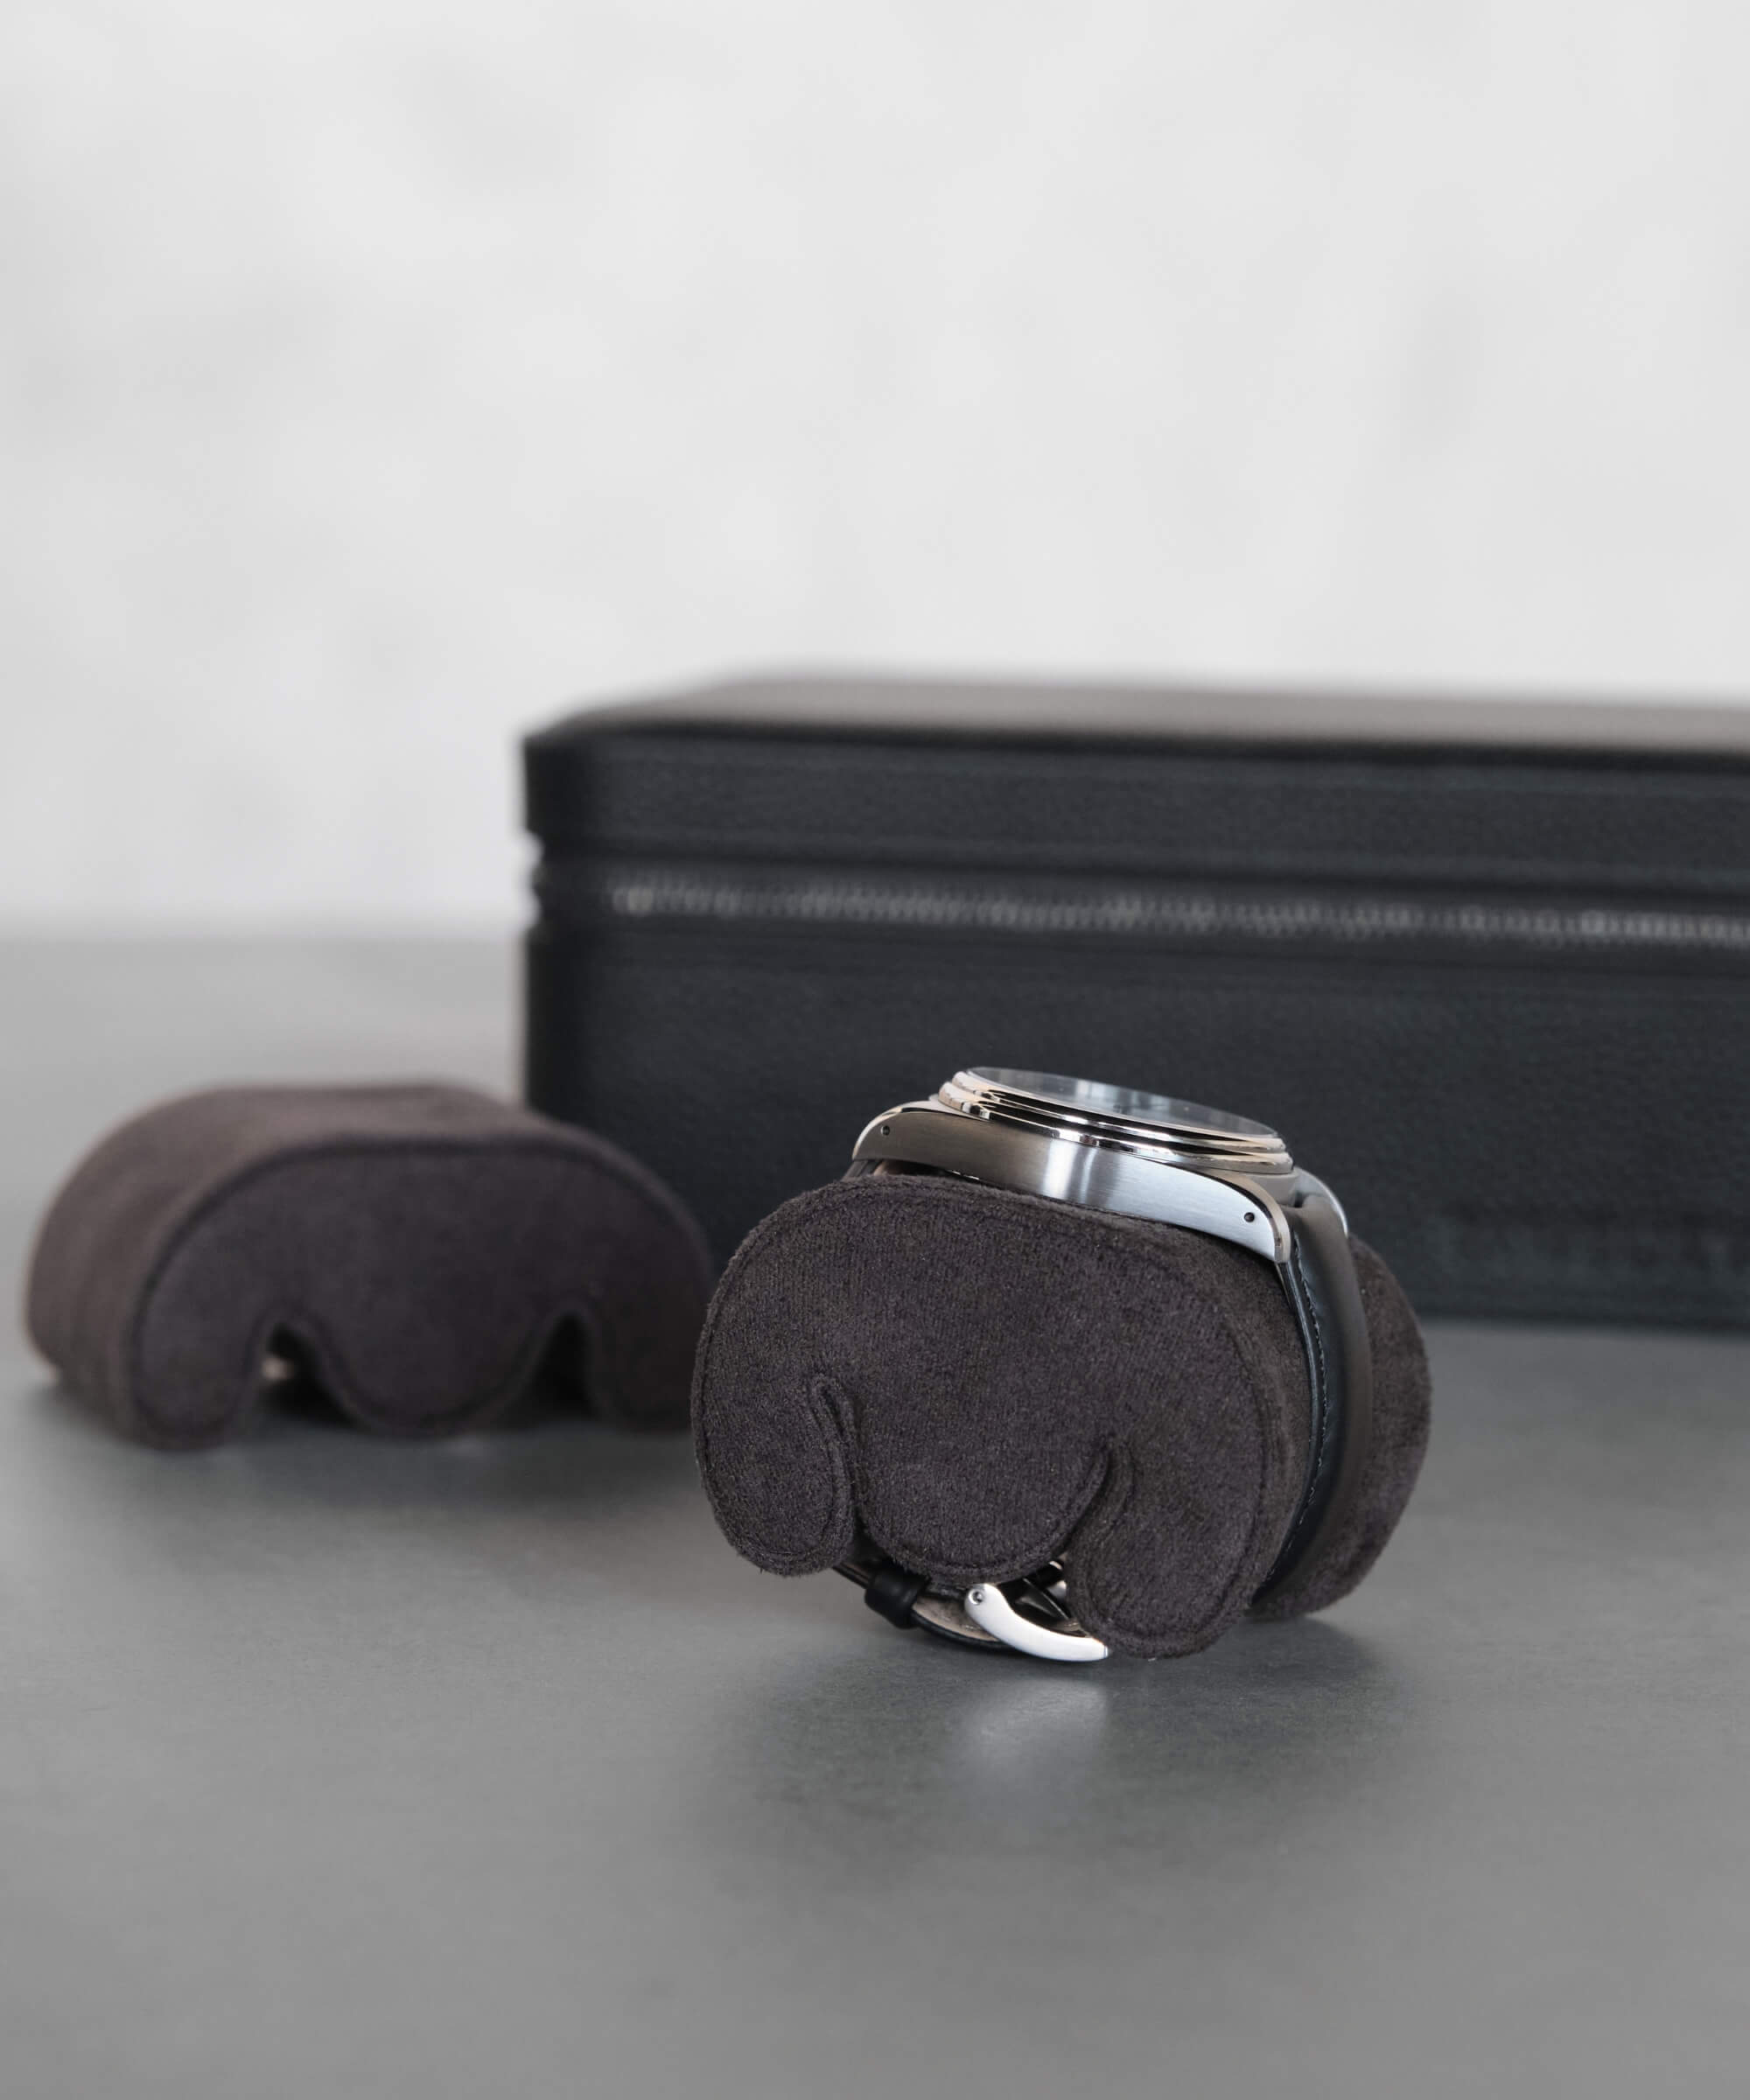 Two Fraser Replacement Watch Case Pillows - X-Small - Black/Charcoal by TAWBURY are encased in protective black covers on a gray surface, with a zippered black case featuring watch slots in the background.